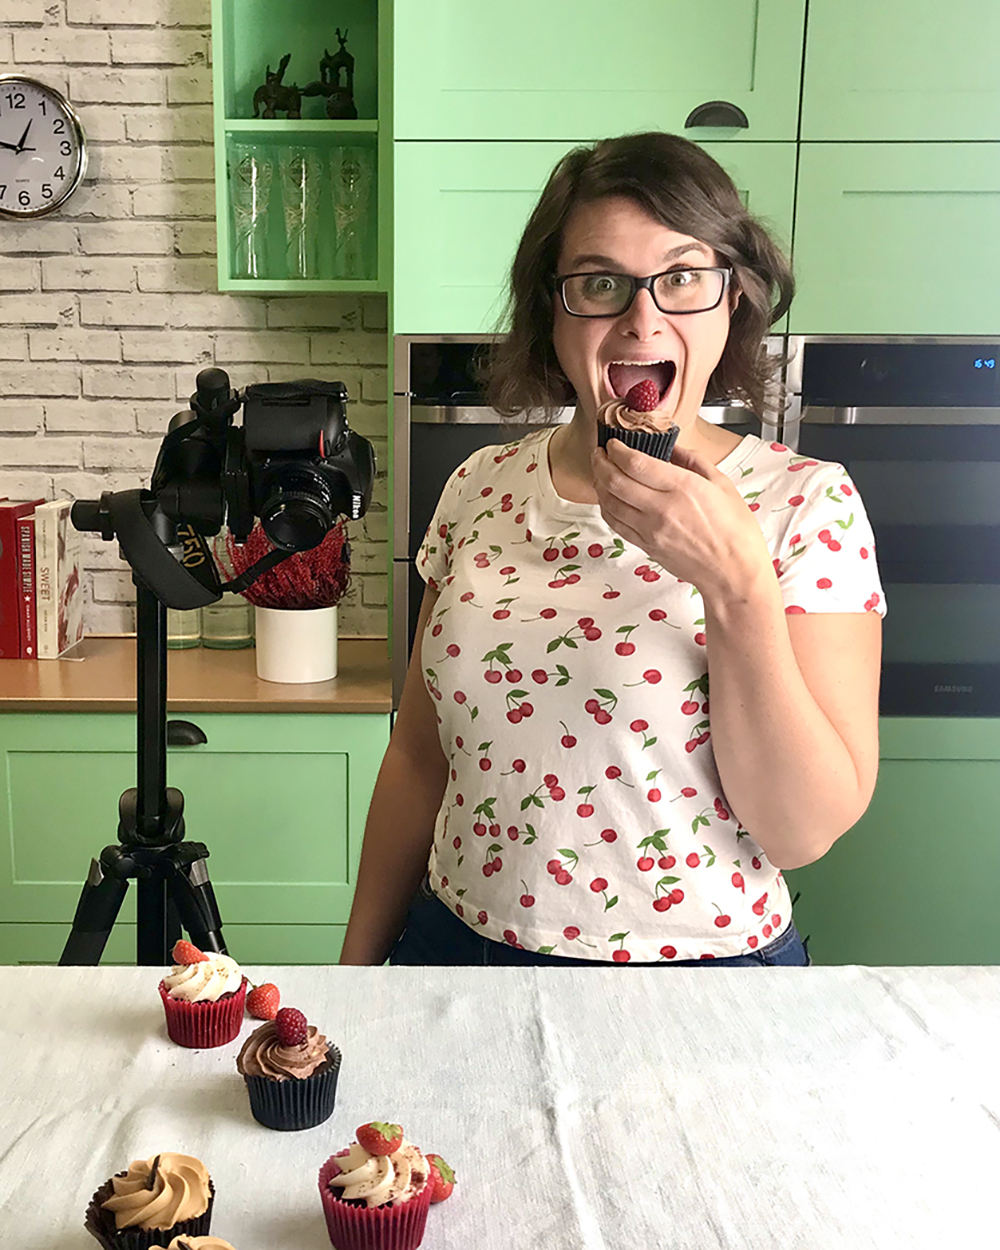 I am your teacher - portrait of me eating a cupcake